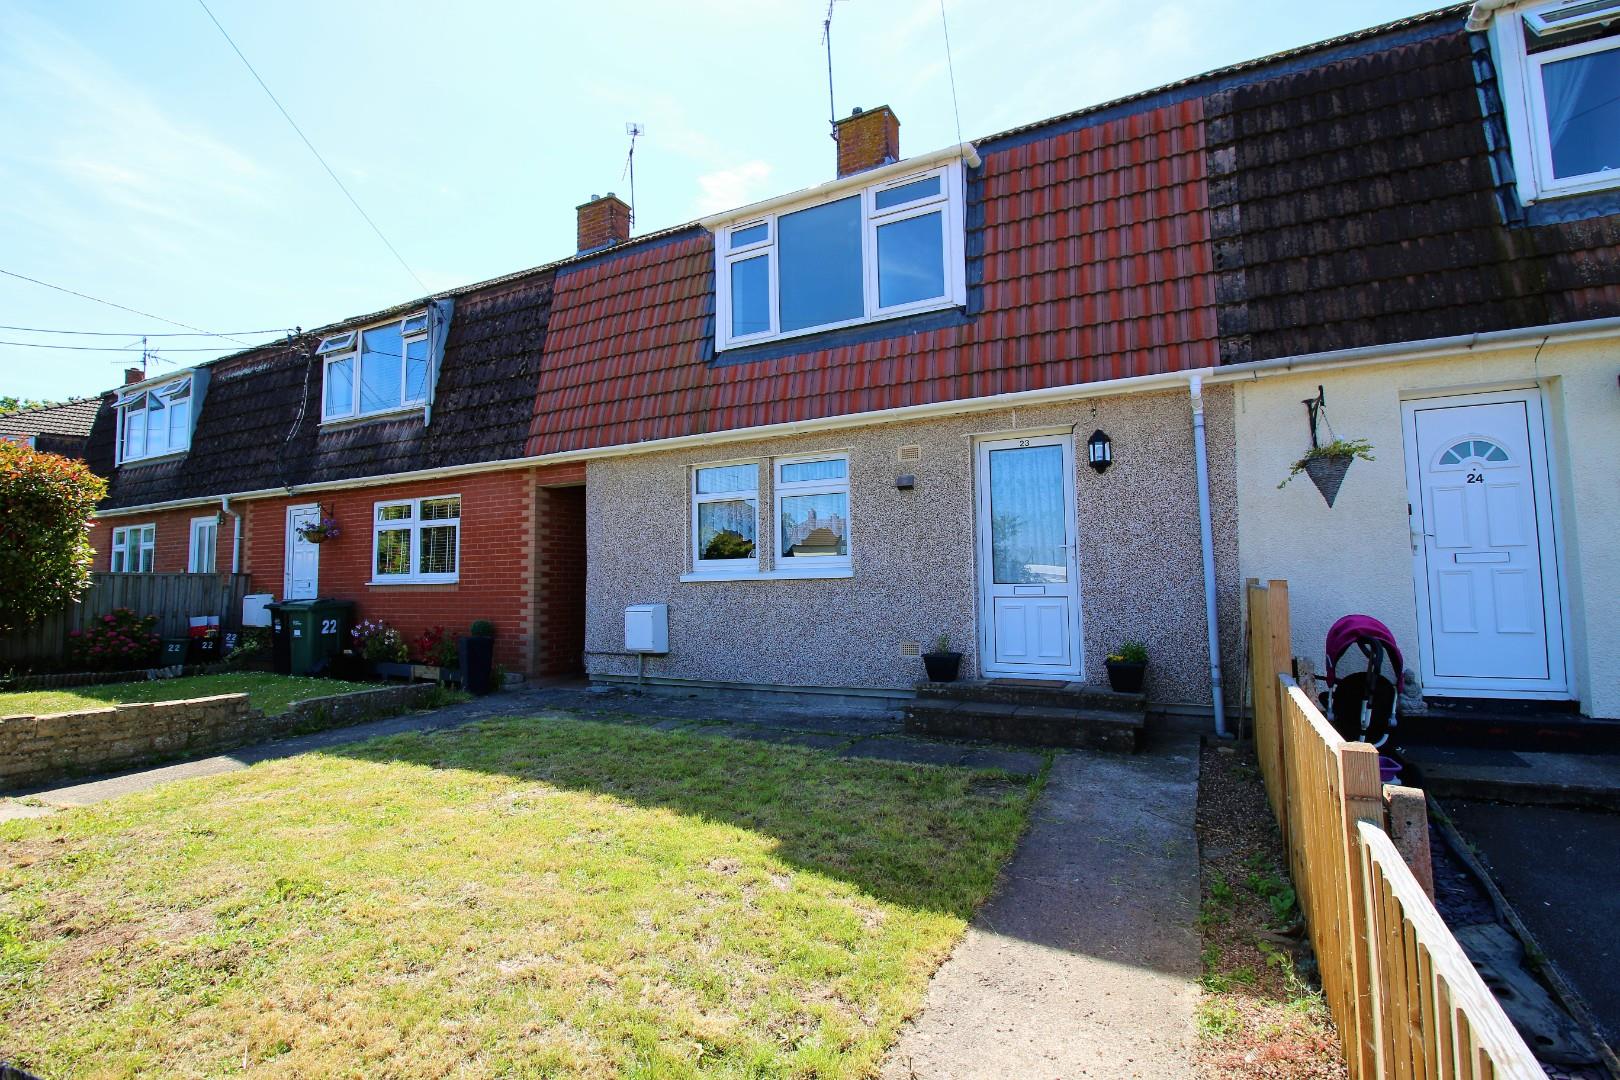 Three bedroom terraced home that offers exceptional value for money in the village of Claverham